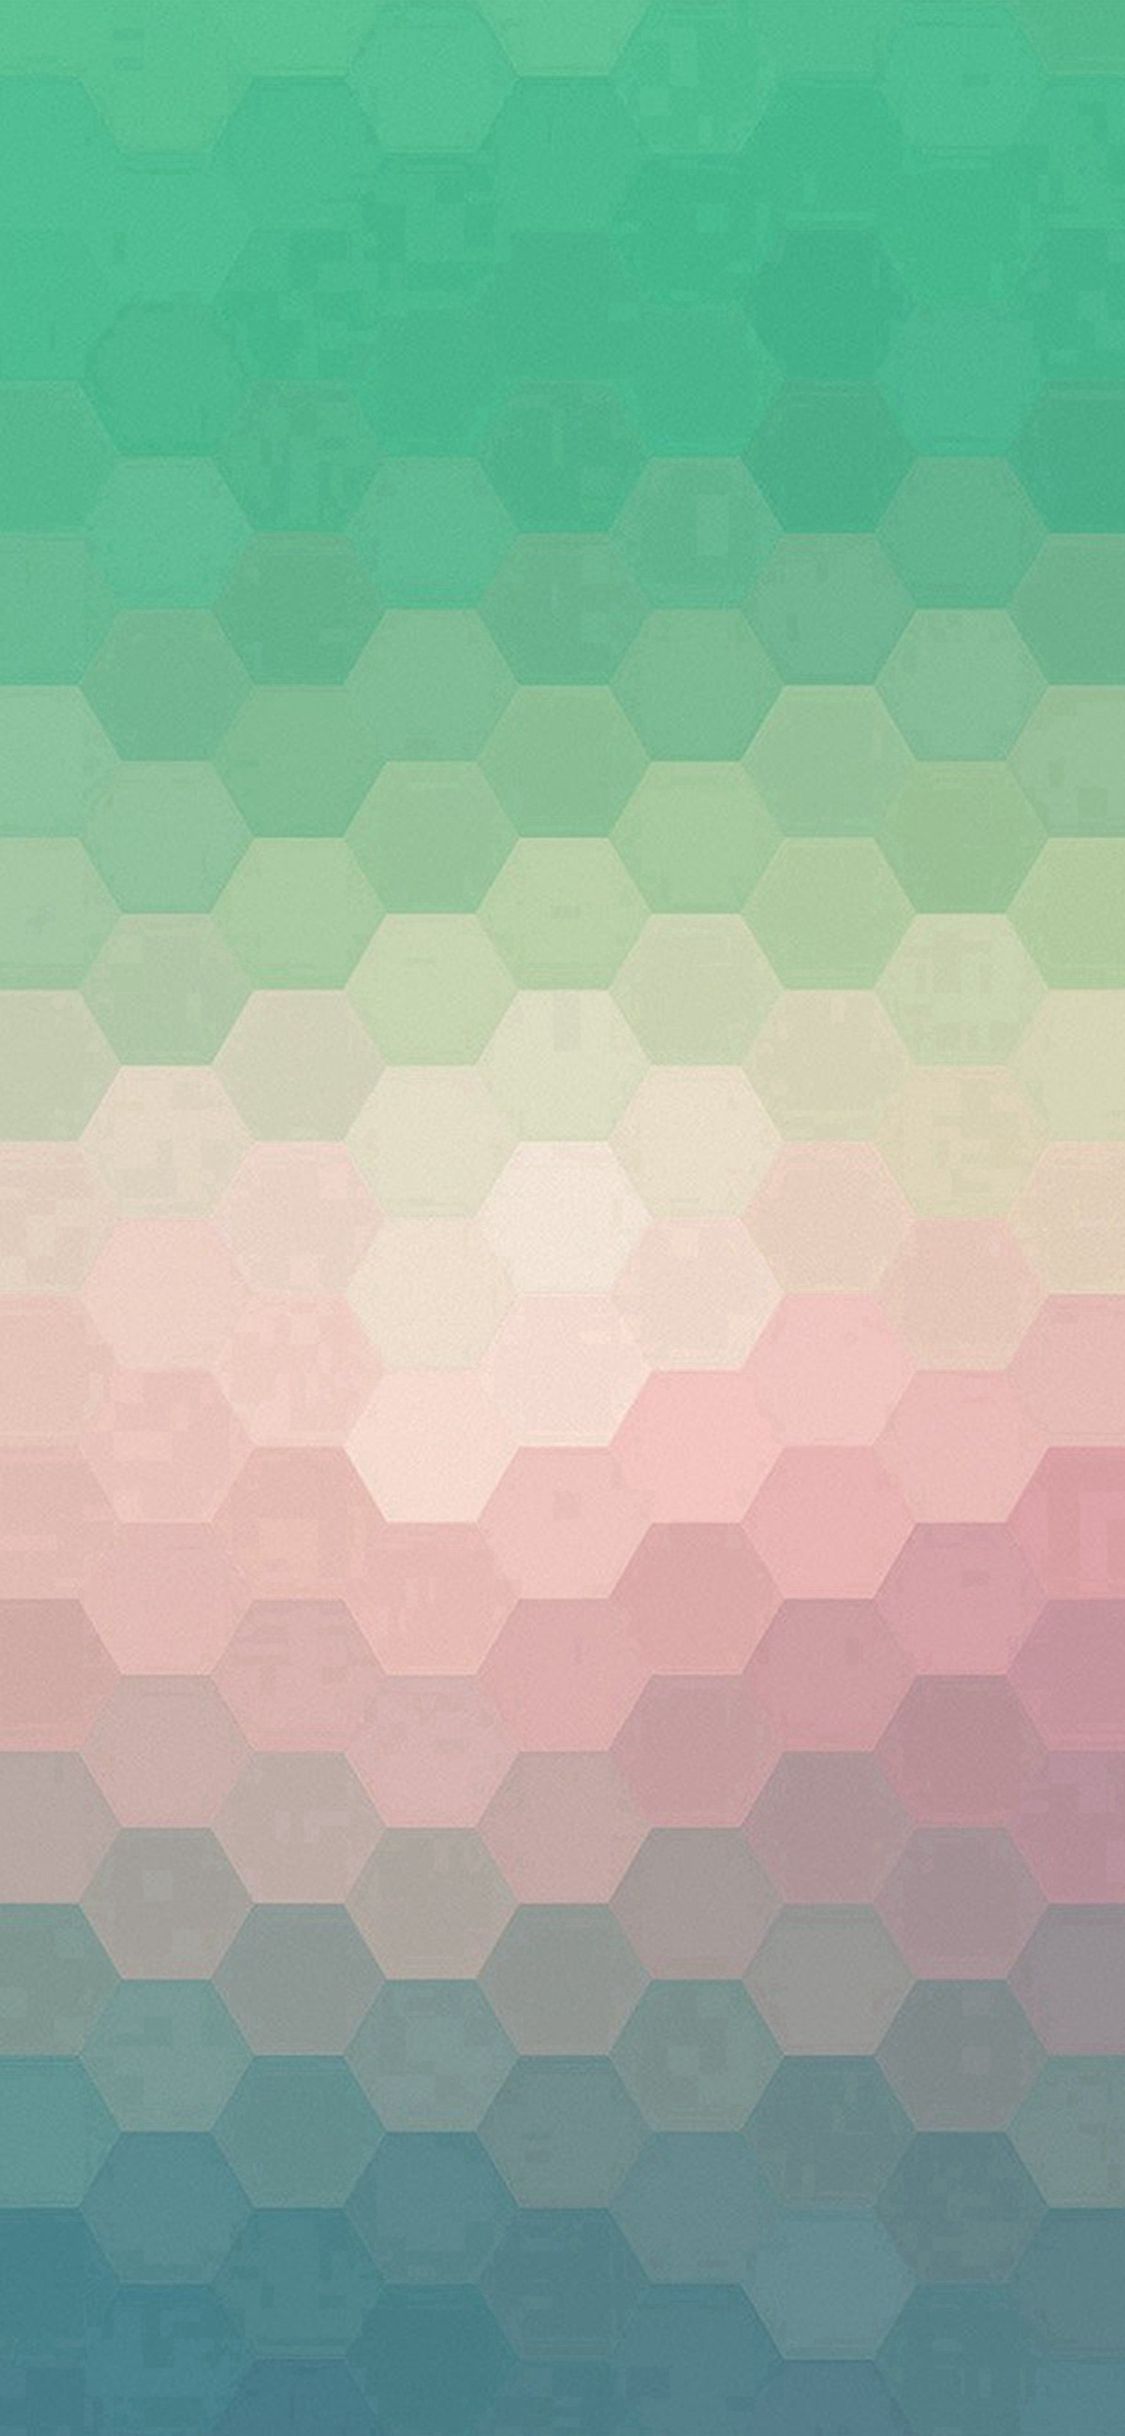 Hexagon Green Red Pattern Background iPhone X Wallpaper Free Download